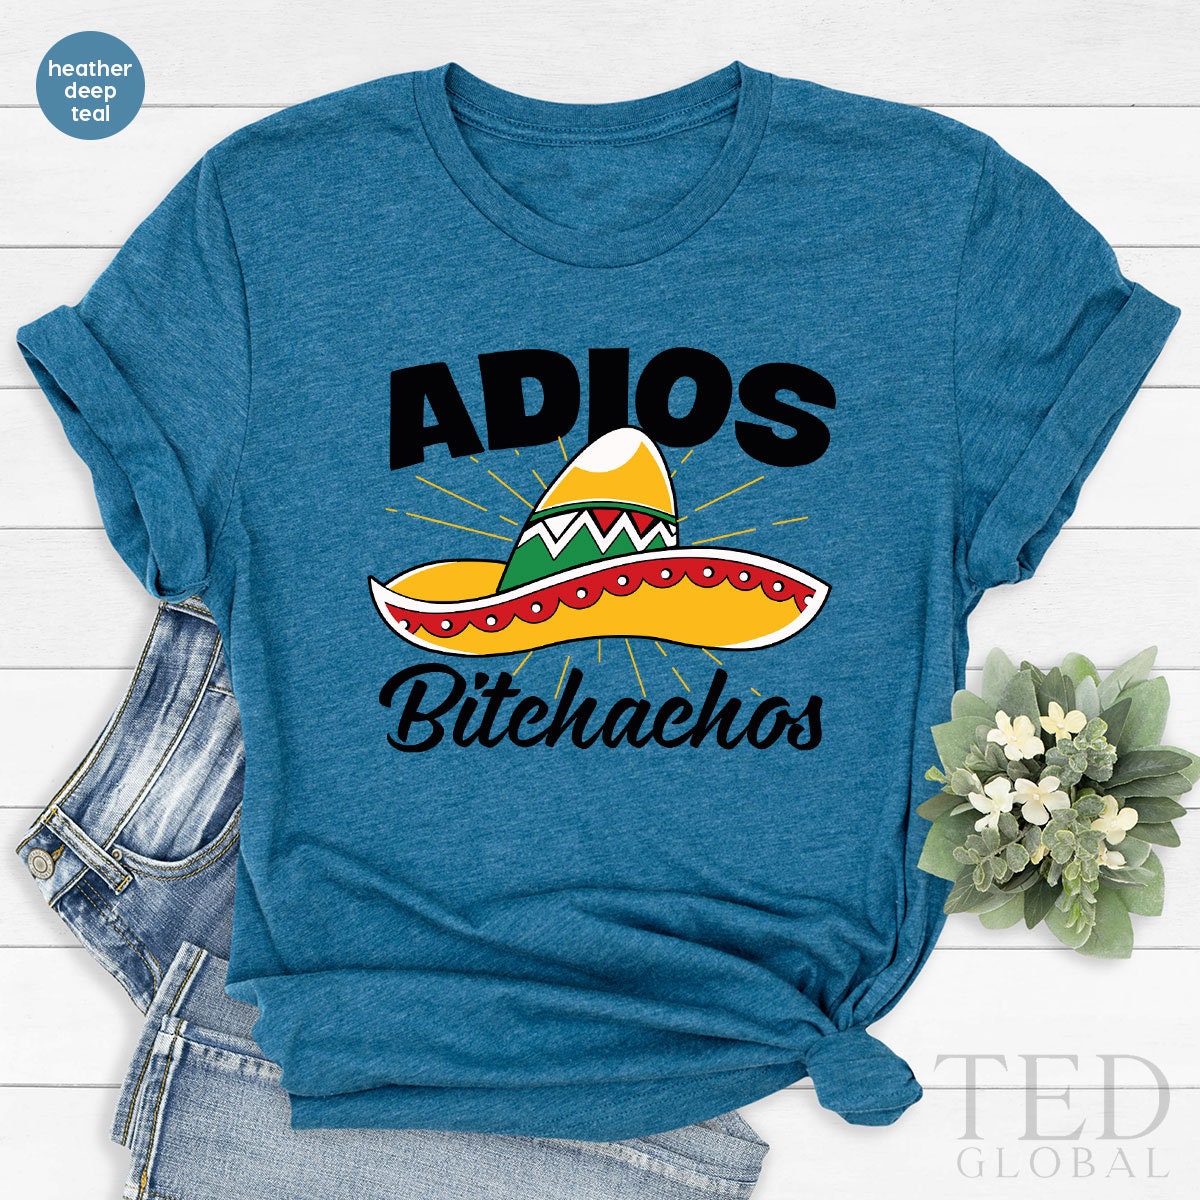 Funny Latino Shirt, Cute Mexican T-Shirt, Cool Adios Bitchachos T Shirt, Family Latino Shirt, Fiesta Tee, Fiesta Party T-Shirt, Gift For Her - Fastdeliverytees.com